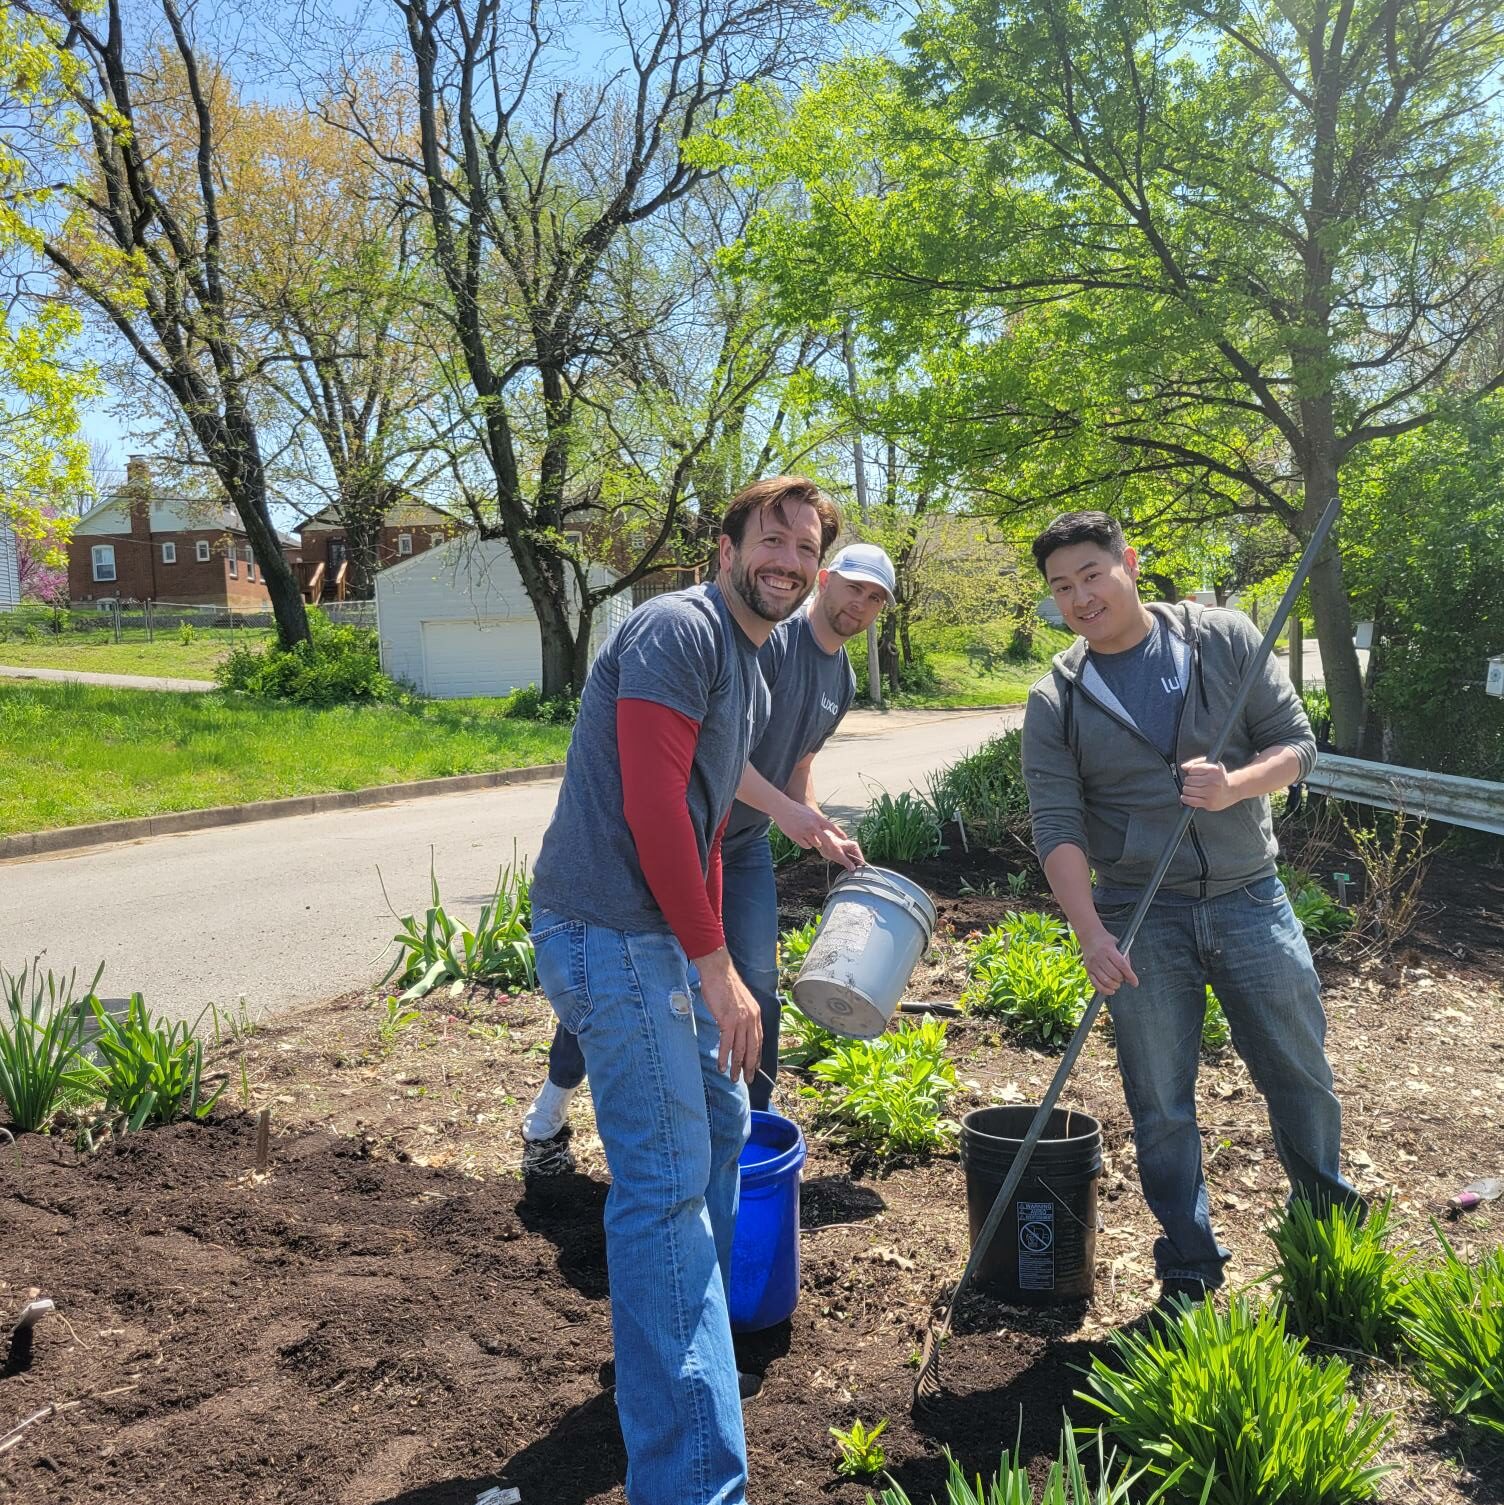 Luxco employees spend the day volunteering around the community